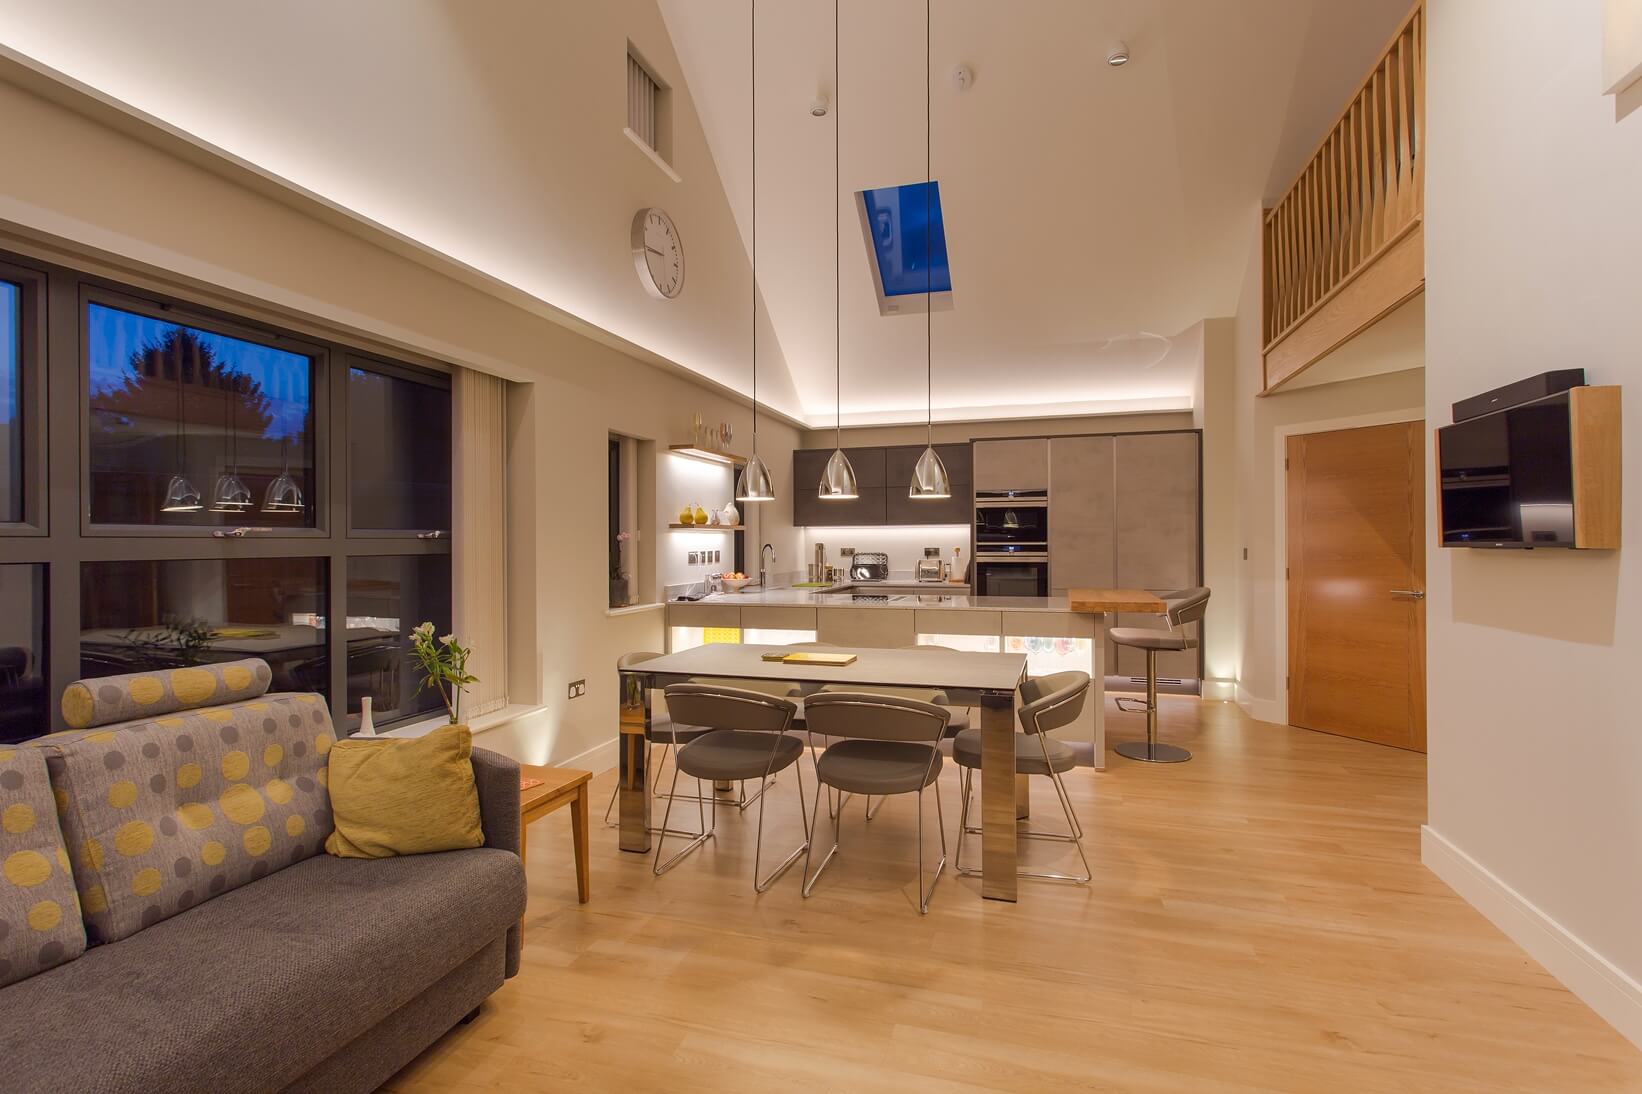 The Importance Of Lighting In Interior Design